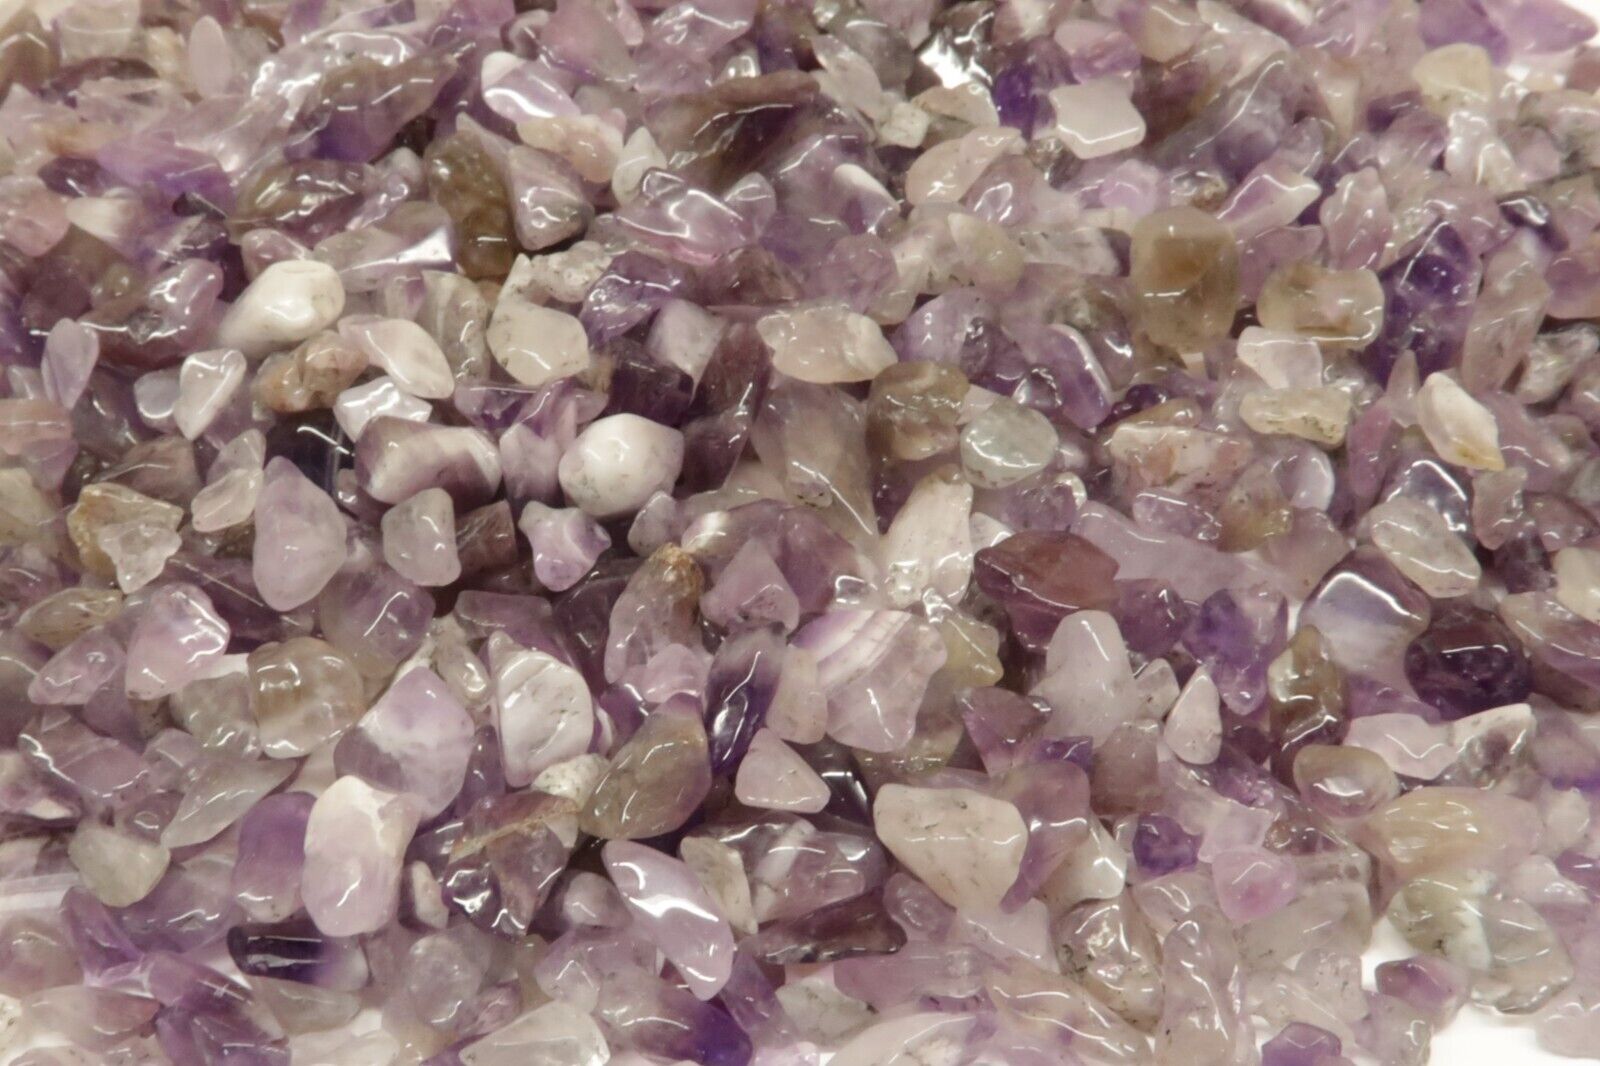 MINI POLISHED DOGTOOTH AMETHYST CHIPS - 1 lb lot - Madagascar - All Natural